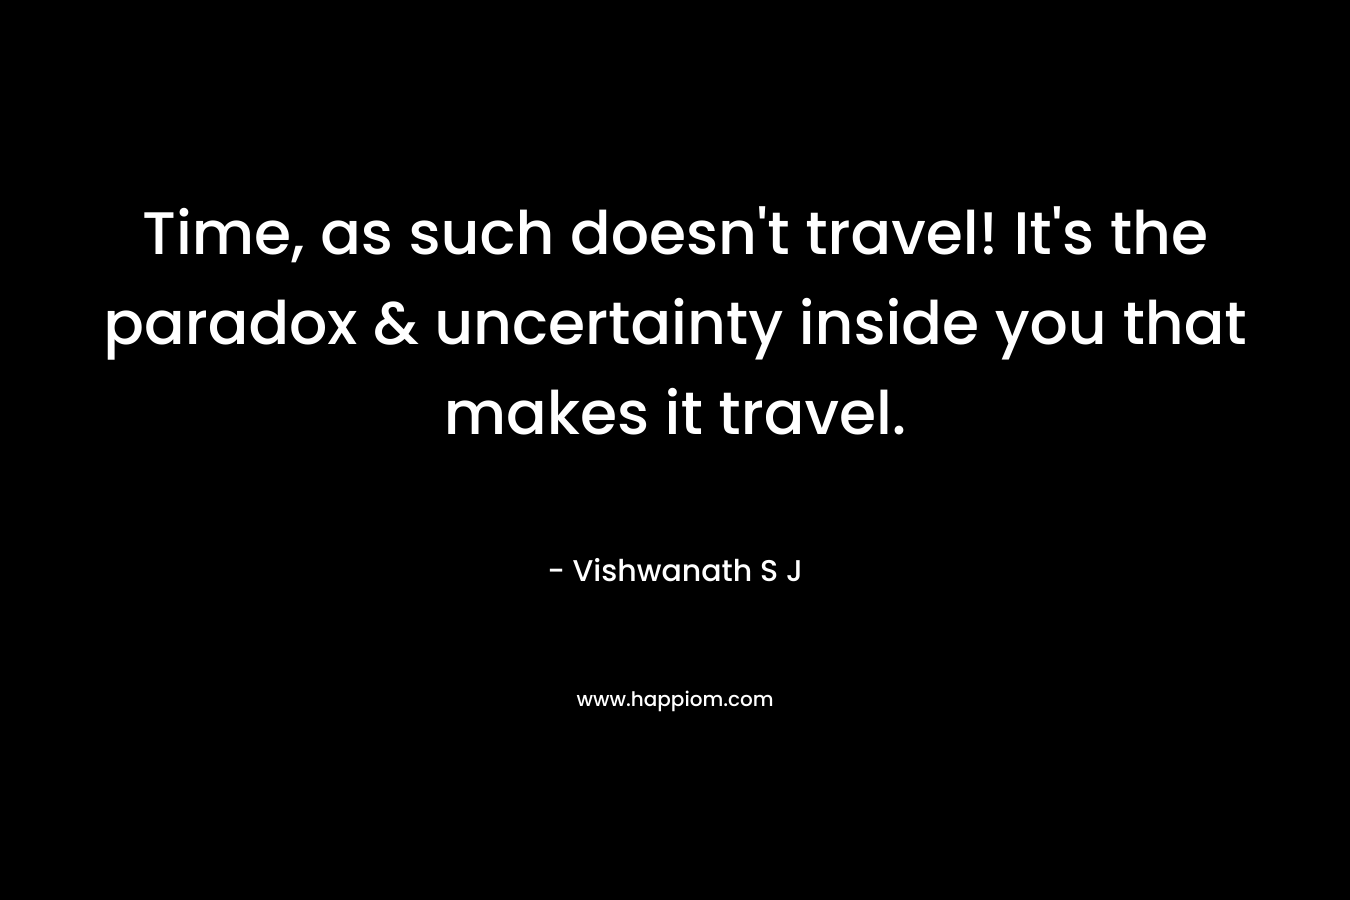 Time, as such doesn't travel! It's the paradox & uncertainty inside you that makes it travel.